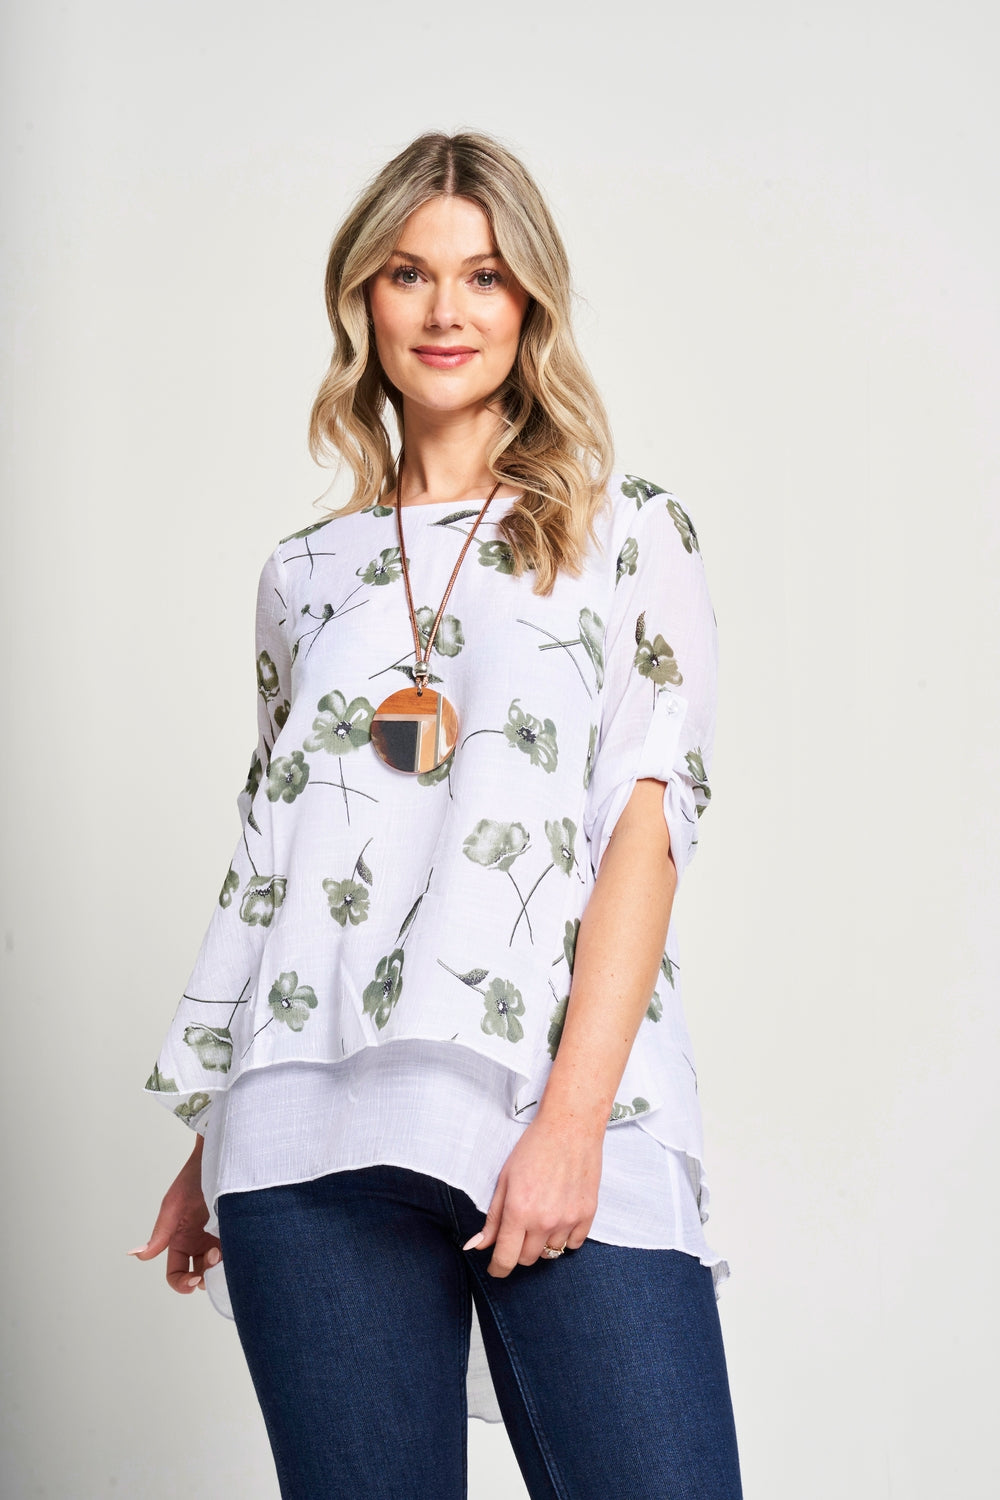 Saloos Linen Look Layered Top with Necklace